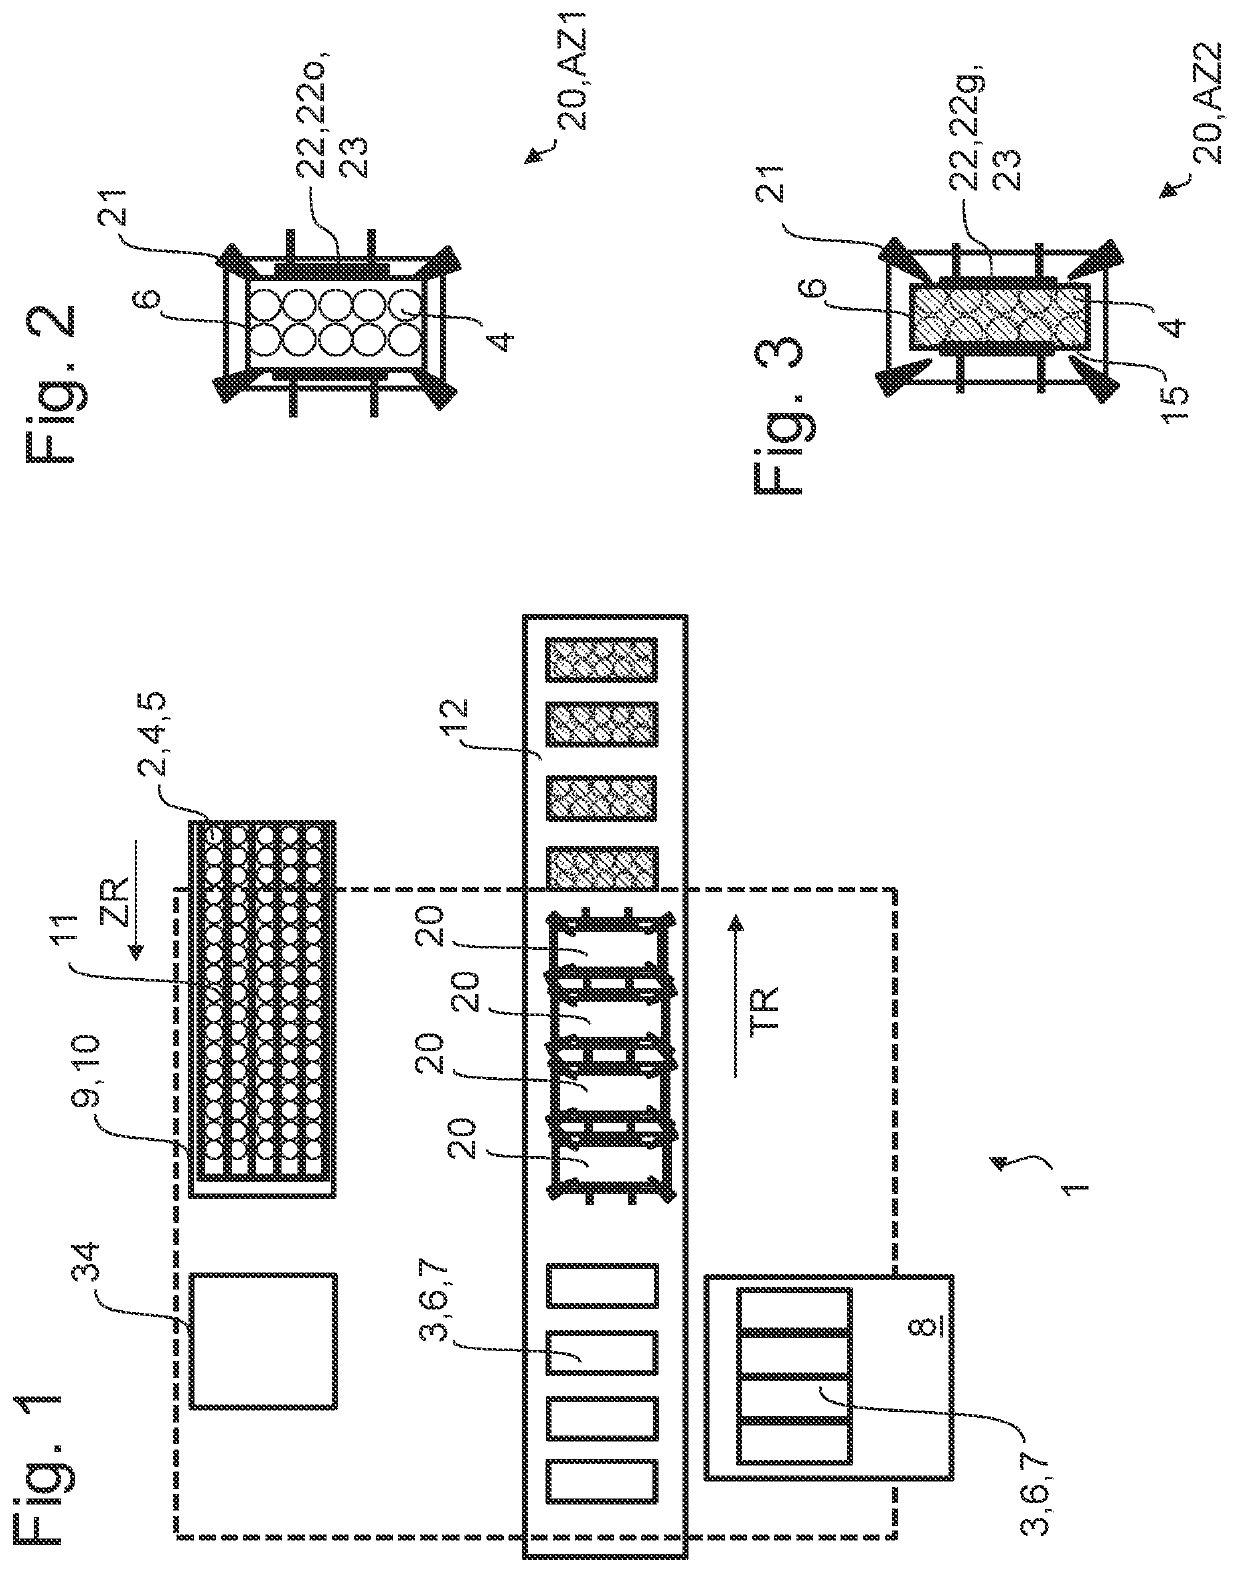 Packaging method for packaging primary packages into secondary packages and packaging module